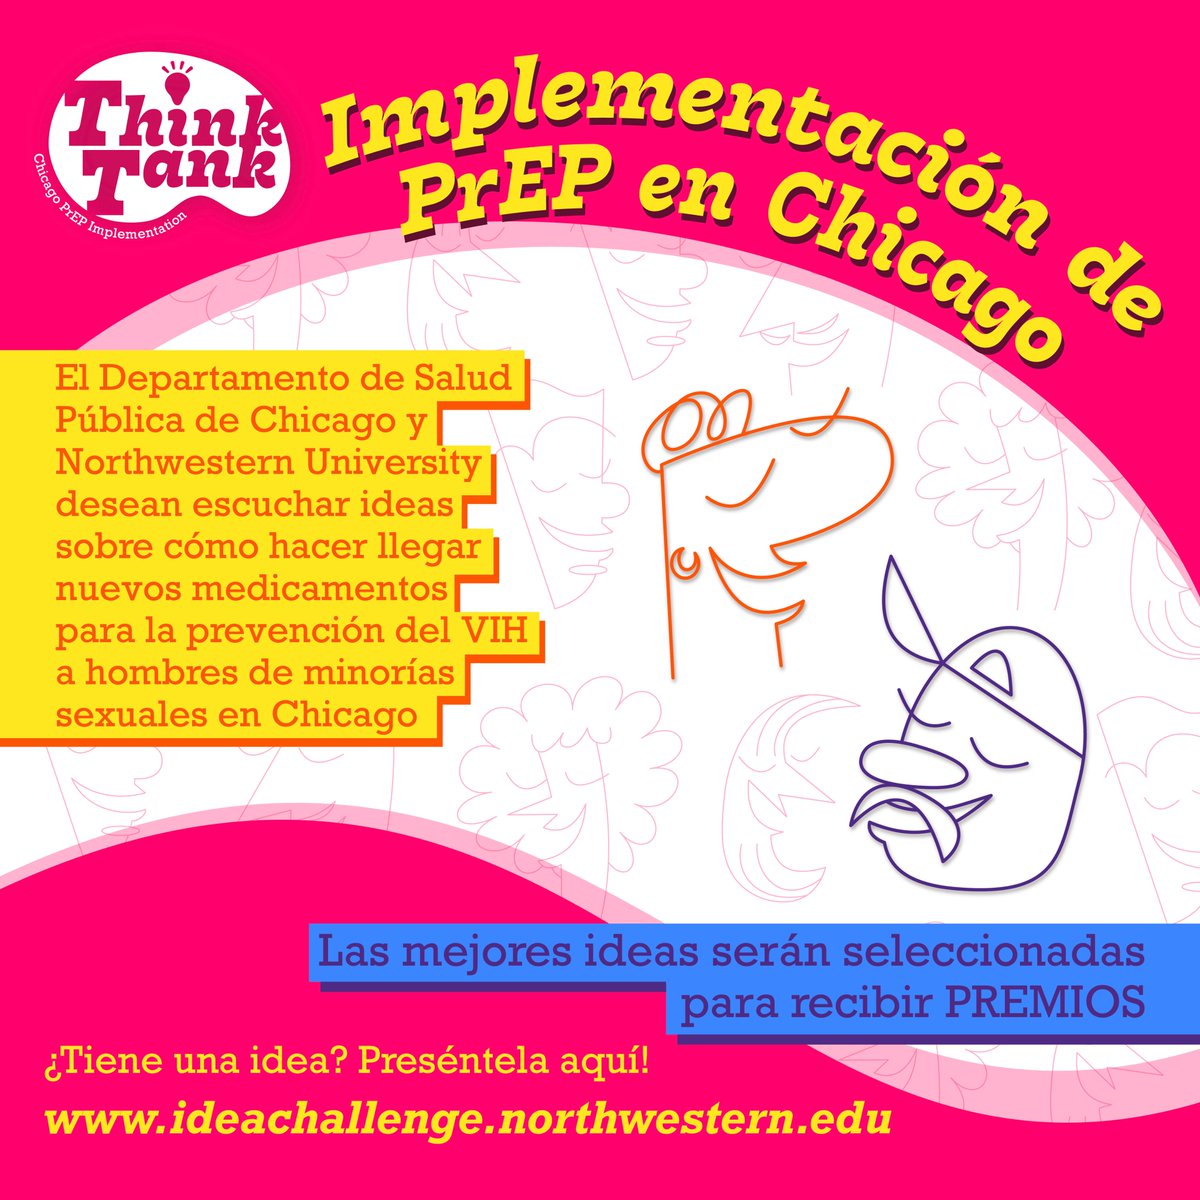 Calling all Chicagoans! This @ThirdCoastCFAR project wants to hear from you ideas for how to get new #HIV prevention #PrEP medications to gay/bi/MSM in Chicago. They are using this cool innovation tournament approach. Submit your ideas in English or Spanish here! -->